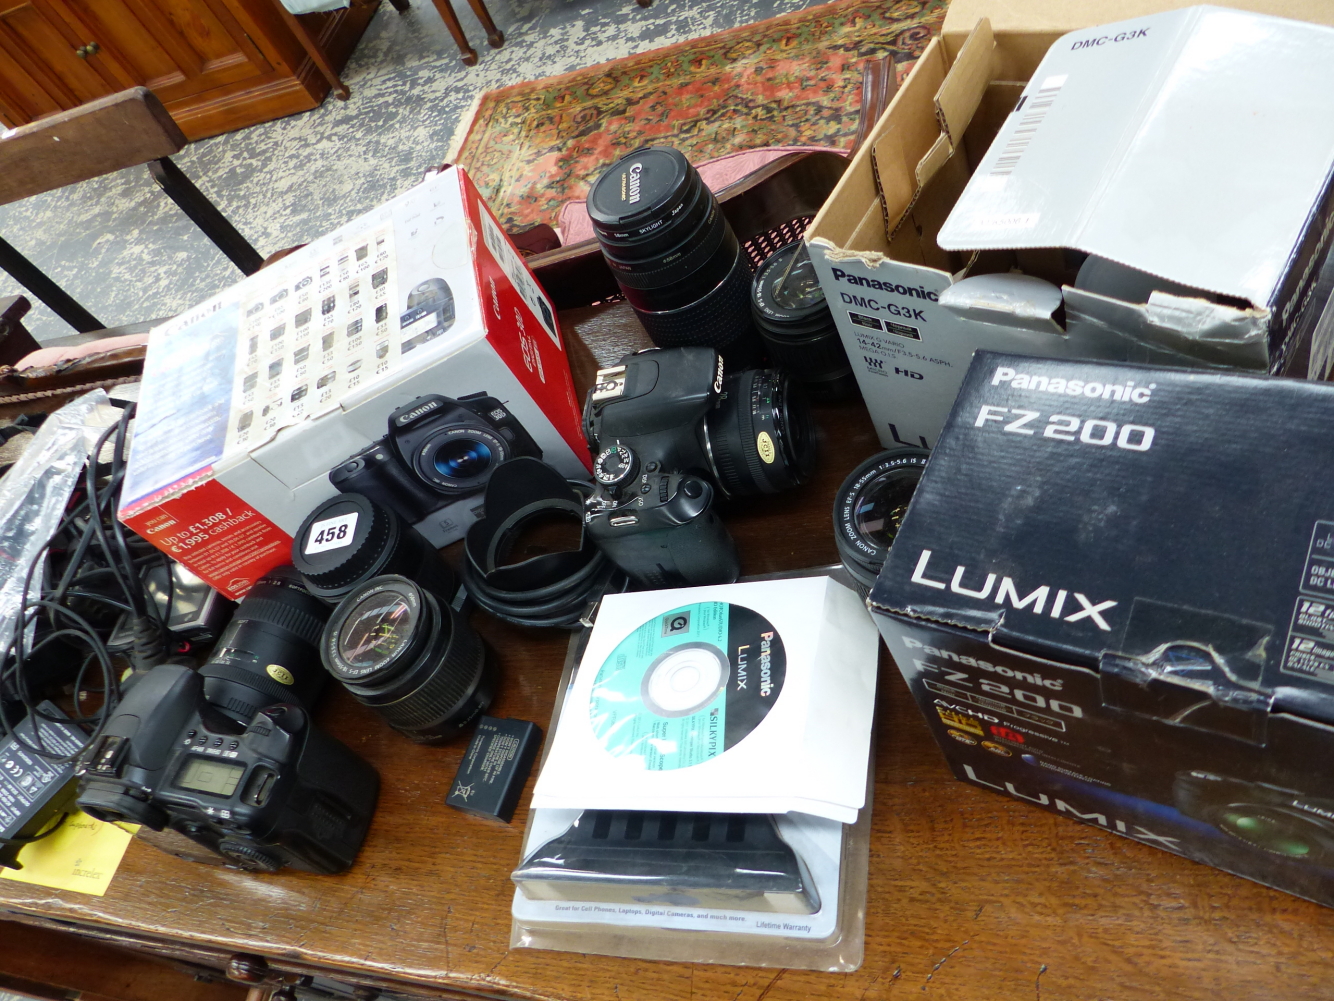 TWO CANON CAMERAS, VARIOUS LENSES,ETC.